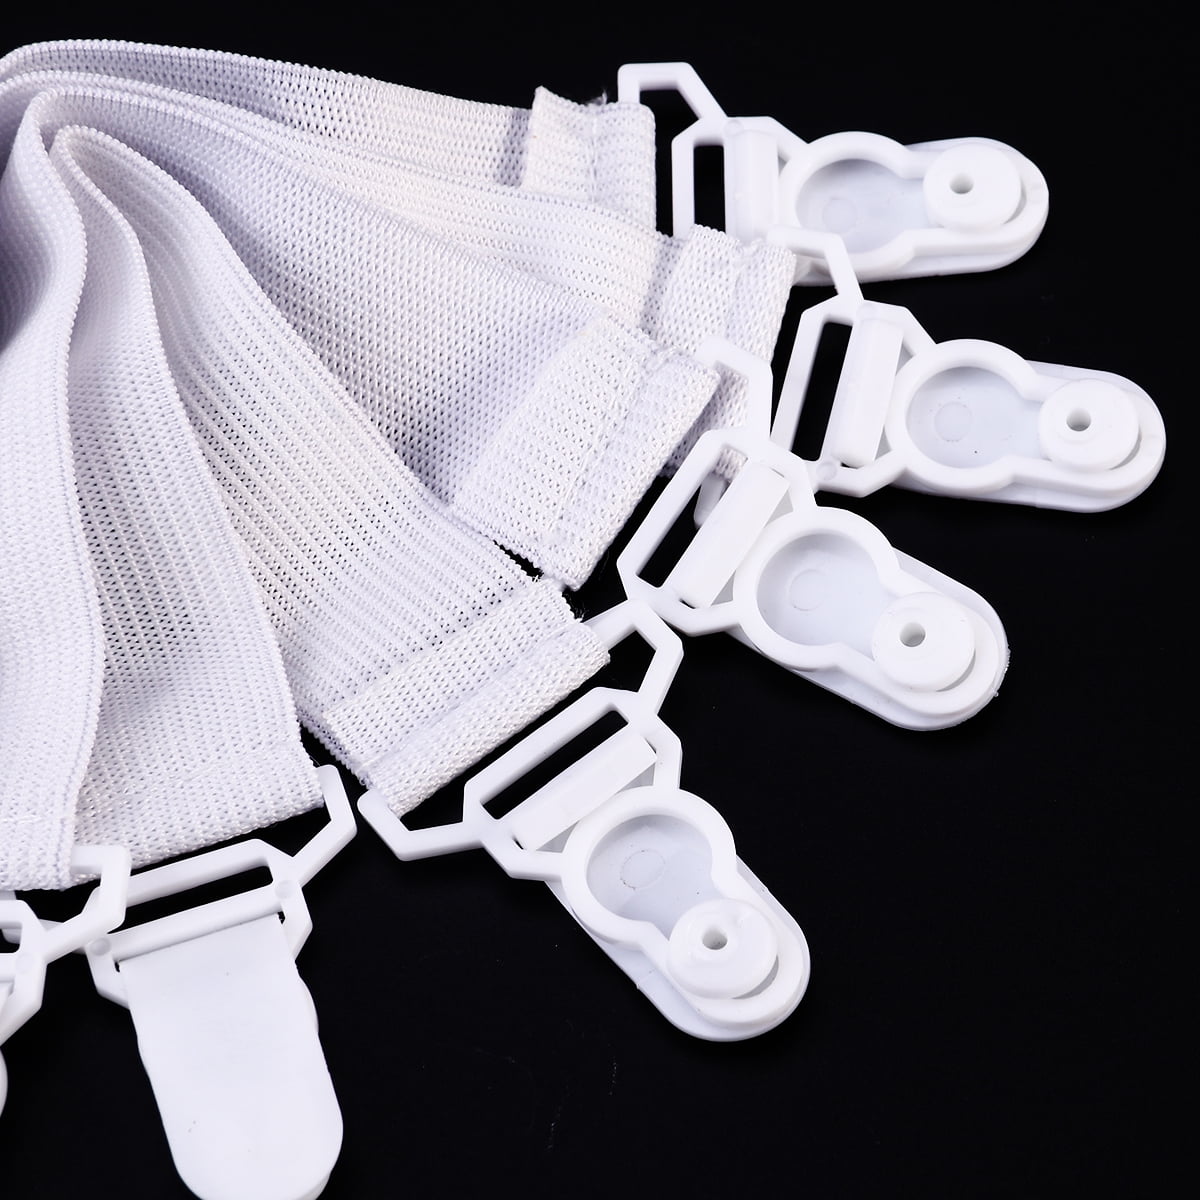 Bed Sheet Grippers Clip Set - Online Low Prices - Molooco Shop